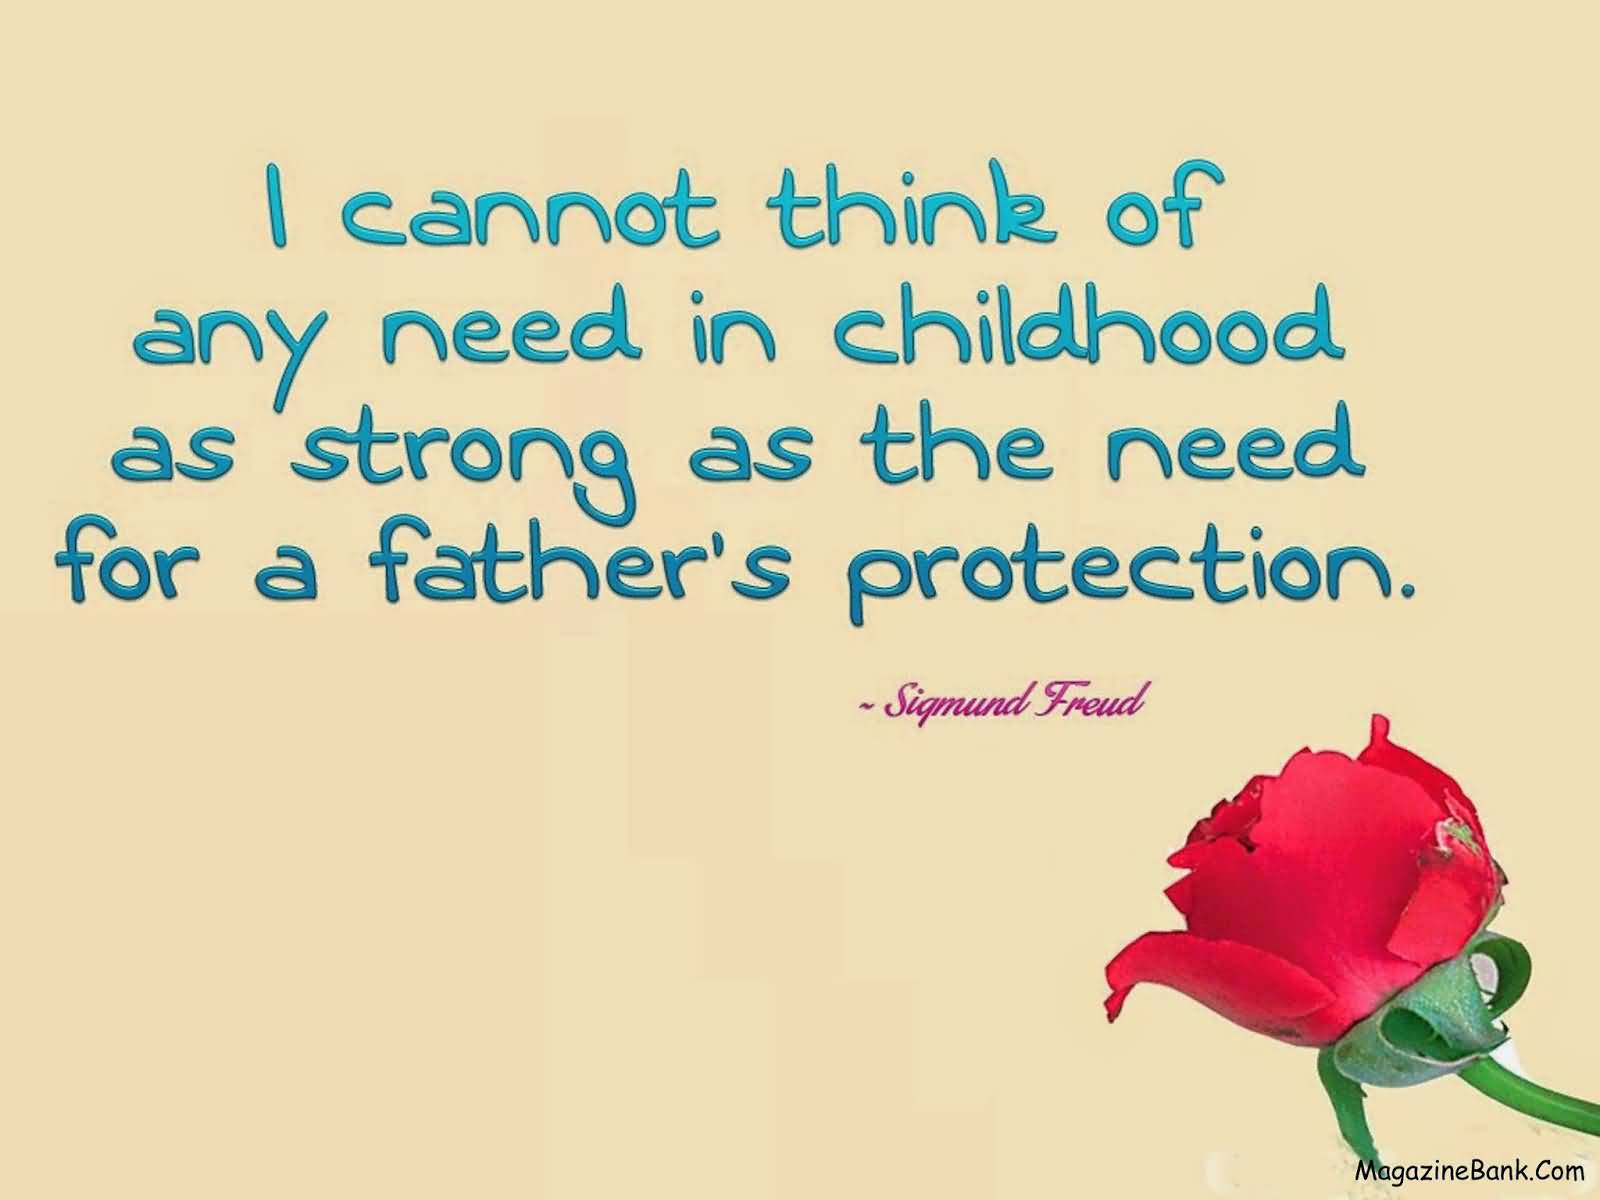 I cannot think of any need in childhood as strong as the need for a father's protection-Sigmund Freud